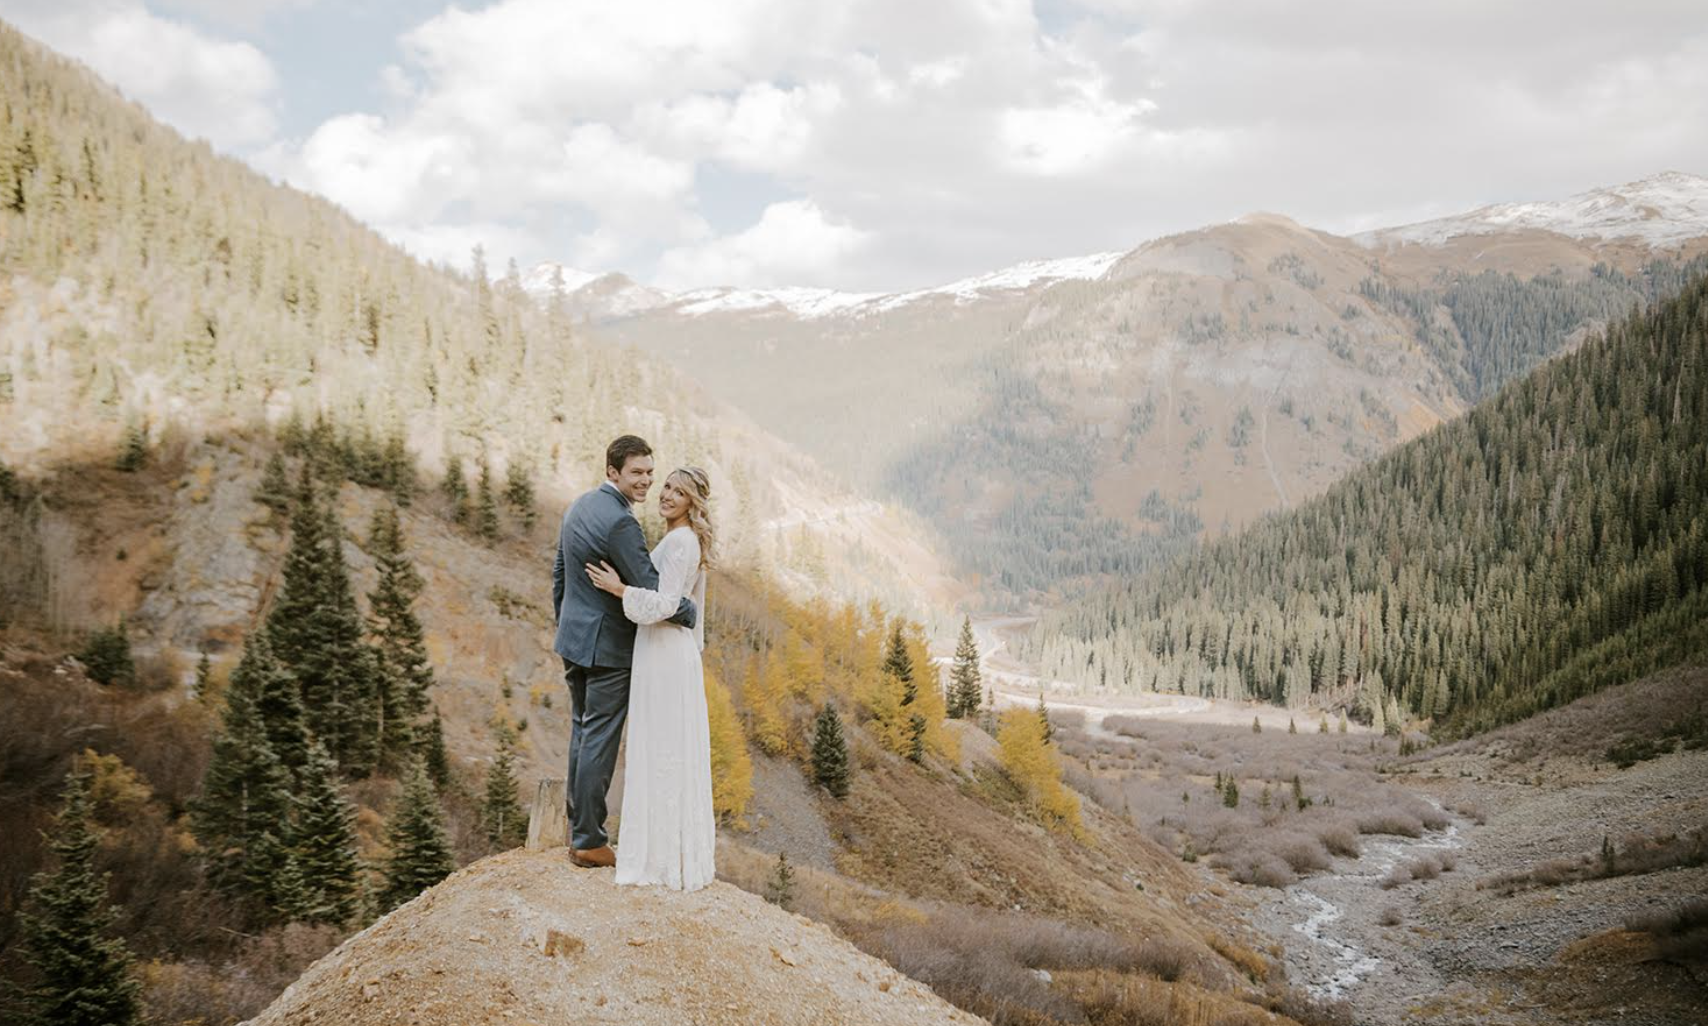 Couple in wedding attire posing in mountains